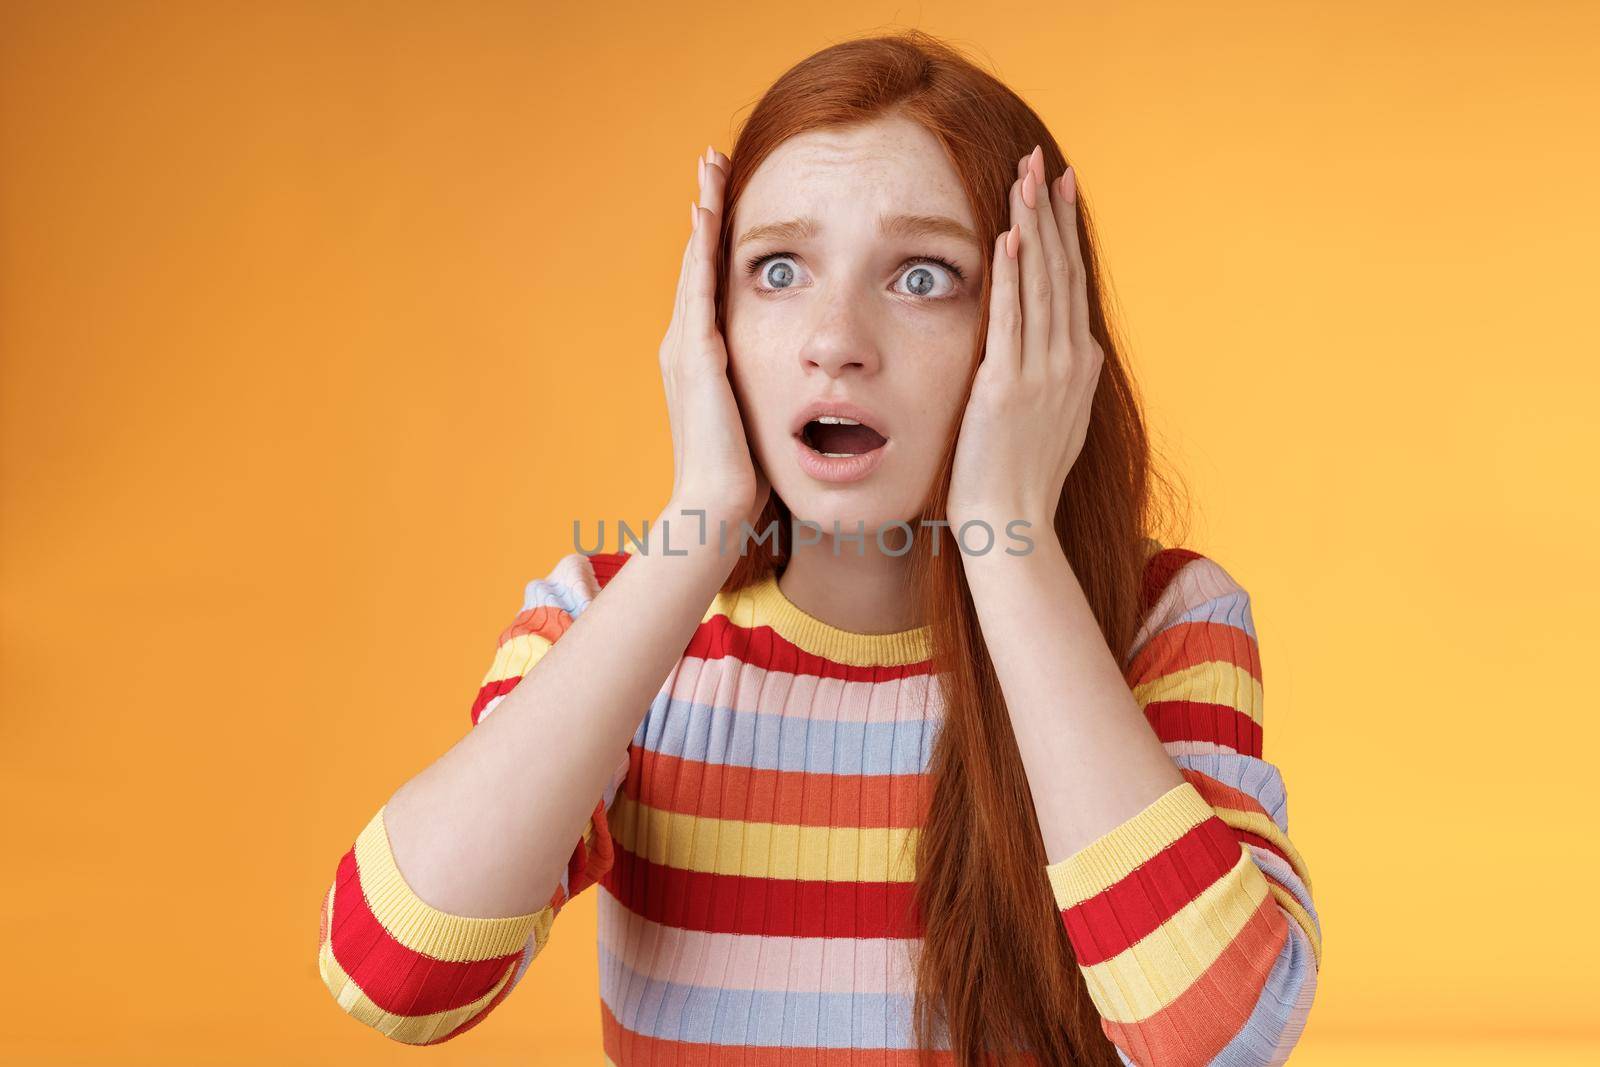 Worry insecure redhead european panicking girl grab head hands both sides gasping open mouth shocked stare frightened upset watching terrible accident standing concerned orange background.